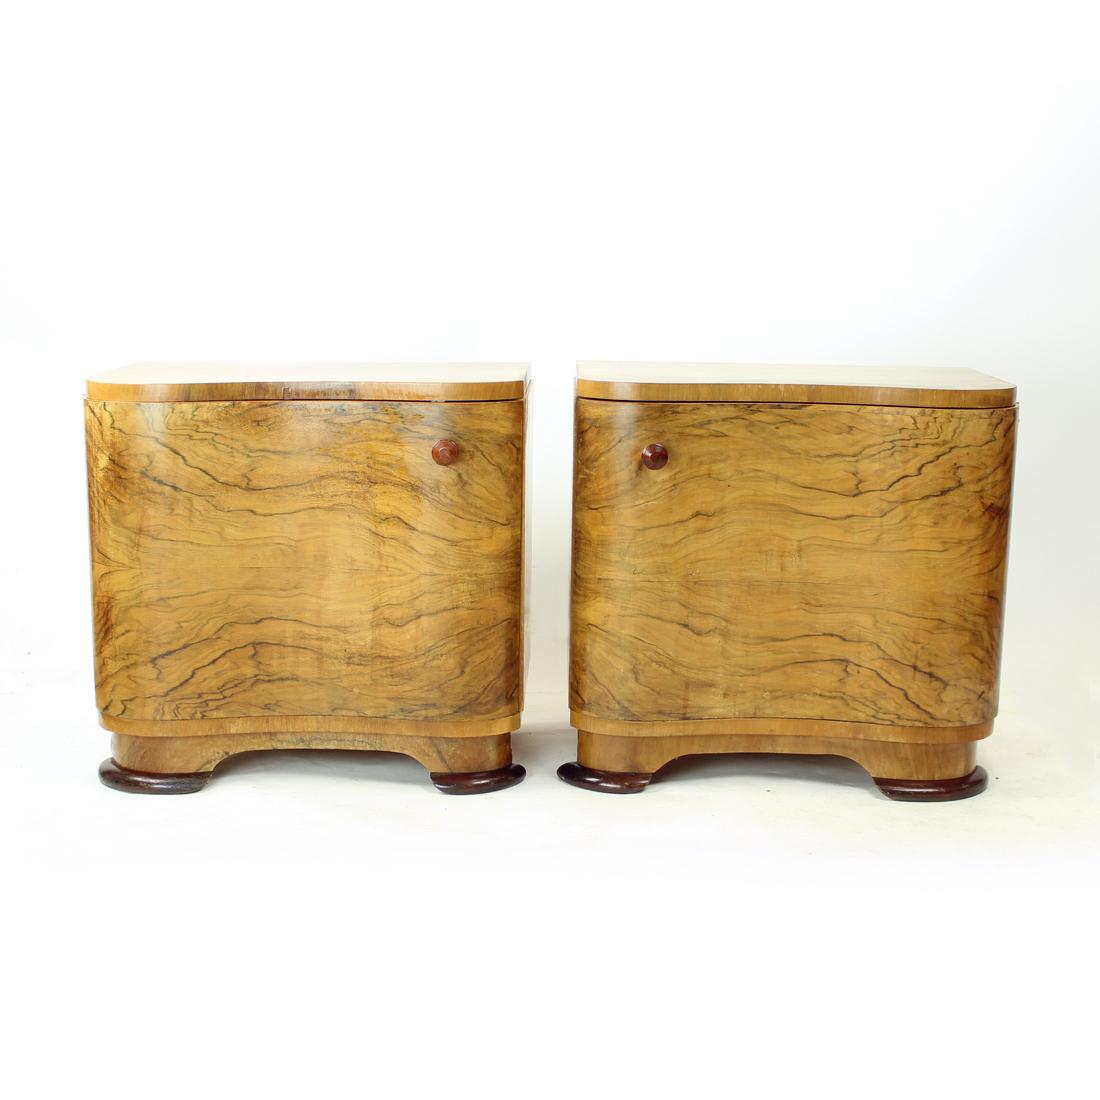 Set of two beautiful bedside tables from art deco era. Produced in Czechoslovakia in 1940s. They are trully unique in their design and use of veneer. The tables are made of oak wood with walnut veneer finish. The beautiful curvy design of the front